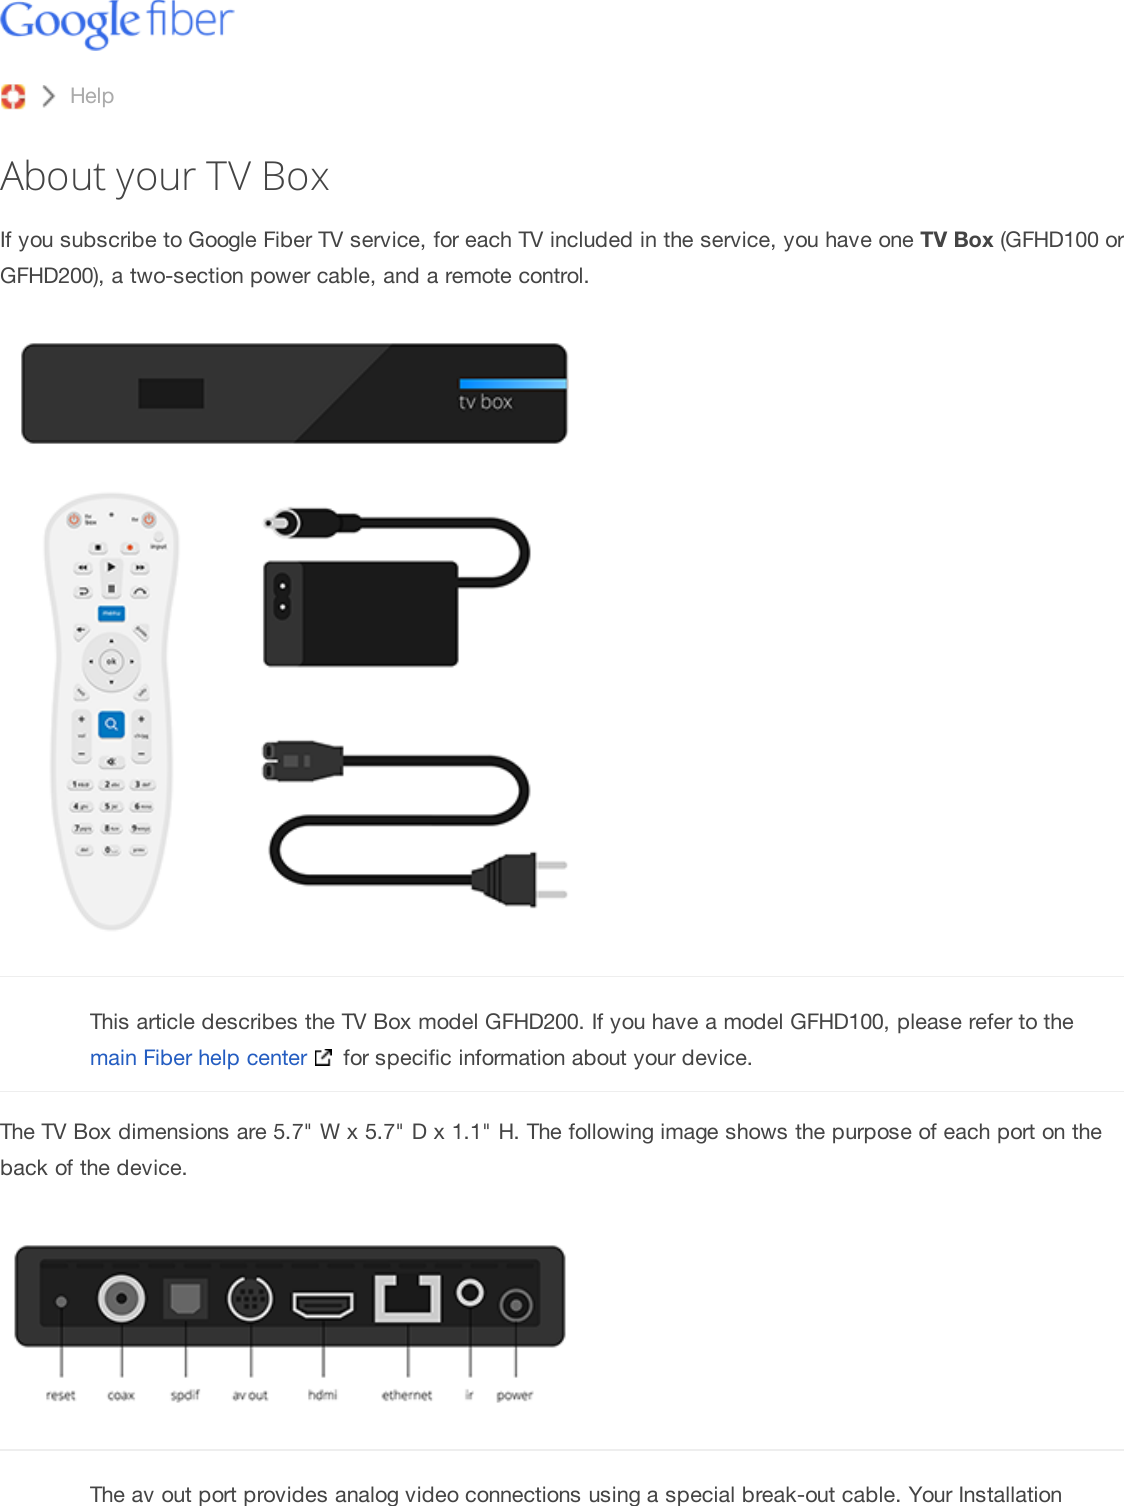 About your TV BoxIf you subscribe to Google Fiber TV service, for each TV included in the service, you have one TV Box (GFHD100 orGFHD200), a two-section power cable, and a remote control.This article describes the TV Box model GFHD200. If you have a model GFHD100, please refer to themain Fiber help center  for specific information about your device.The TV Box dimensions are 5.7&quot; W x 5.7&quot; D x 1.1&quot; H. The following image shows the purpose of each port on theback of the device.The av out port provides analog video connections using a special break-out cable. Your InstallationHelp Contact Us Help forum